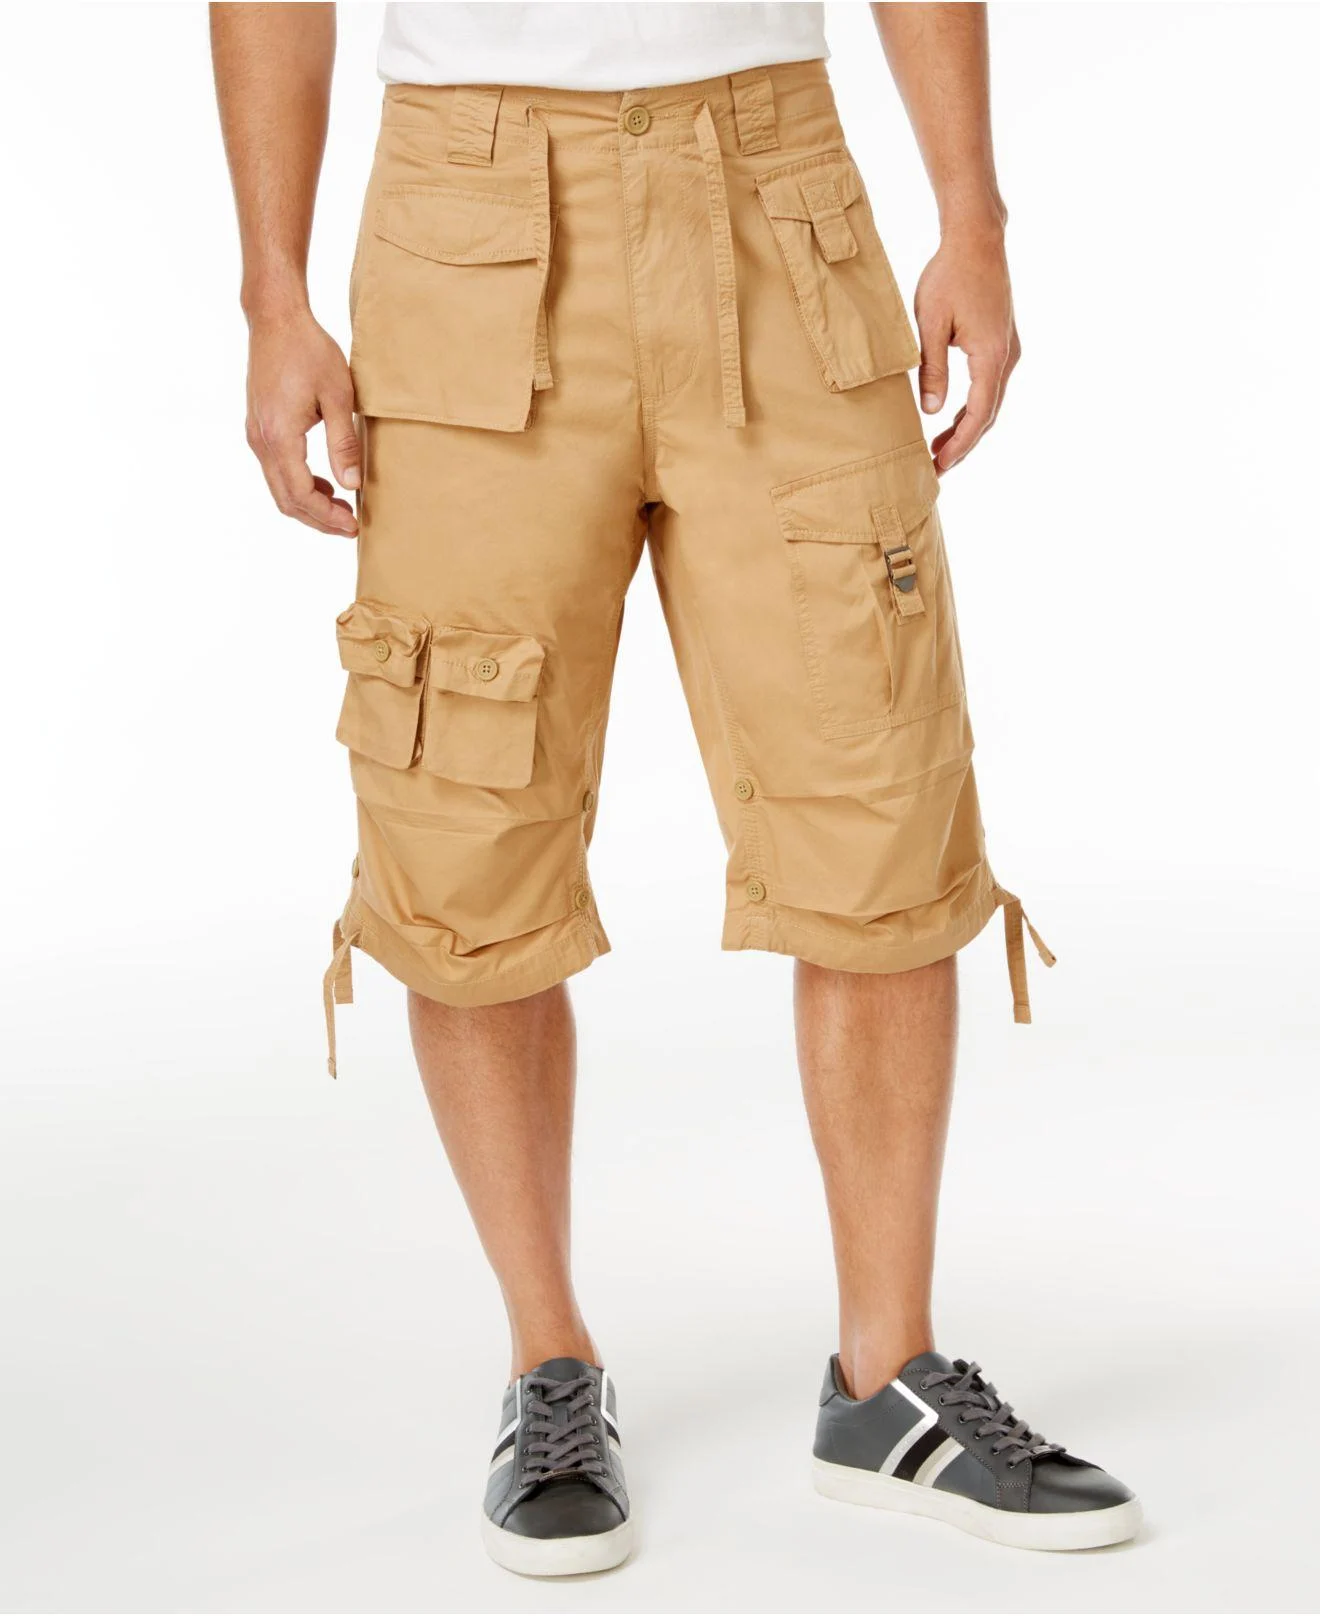 How do you select the perfect length for short cargo shorts?